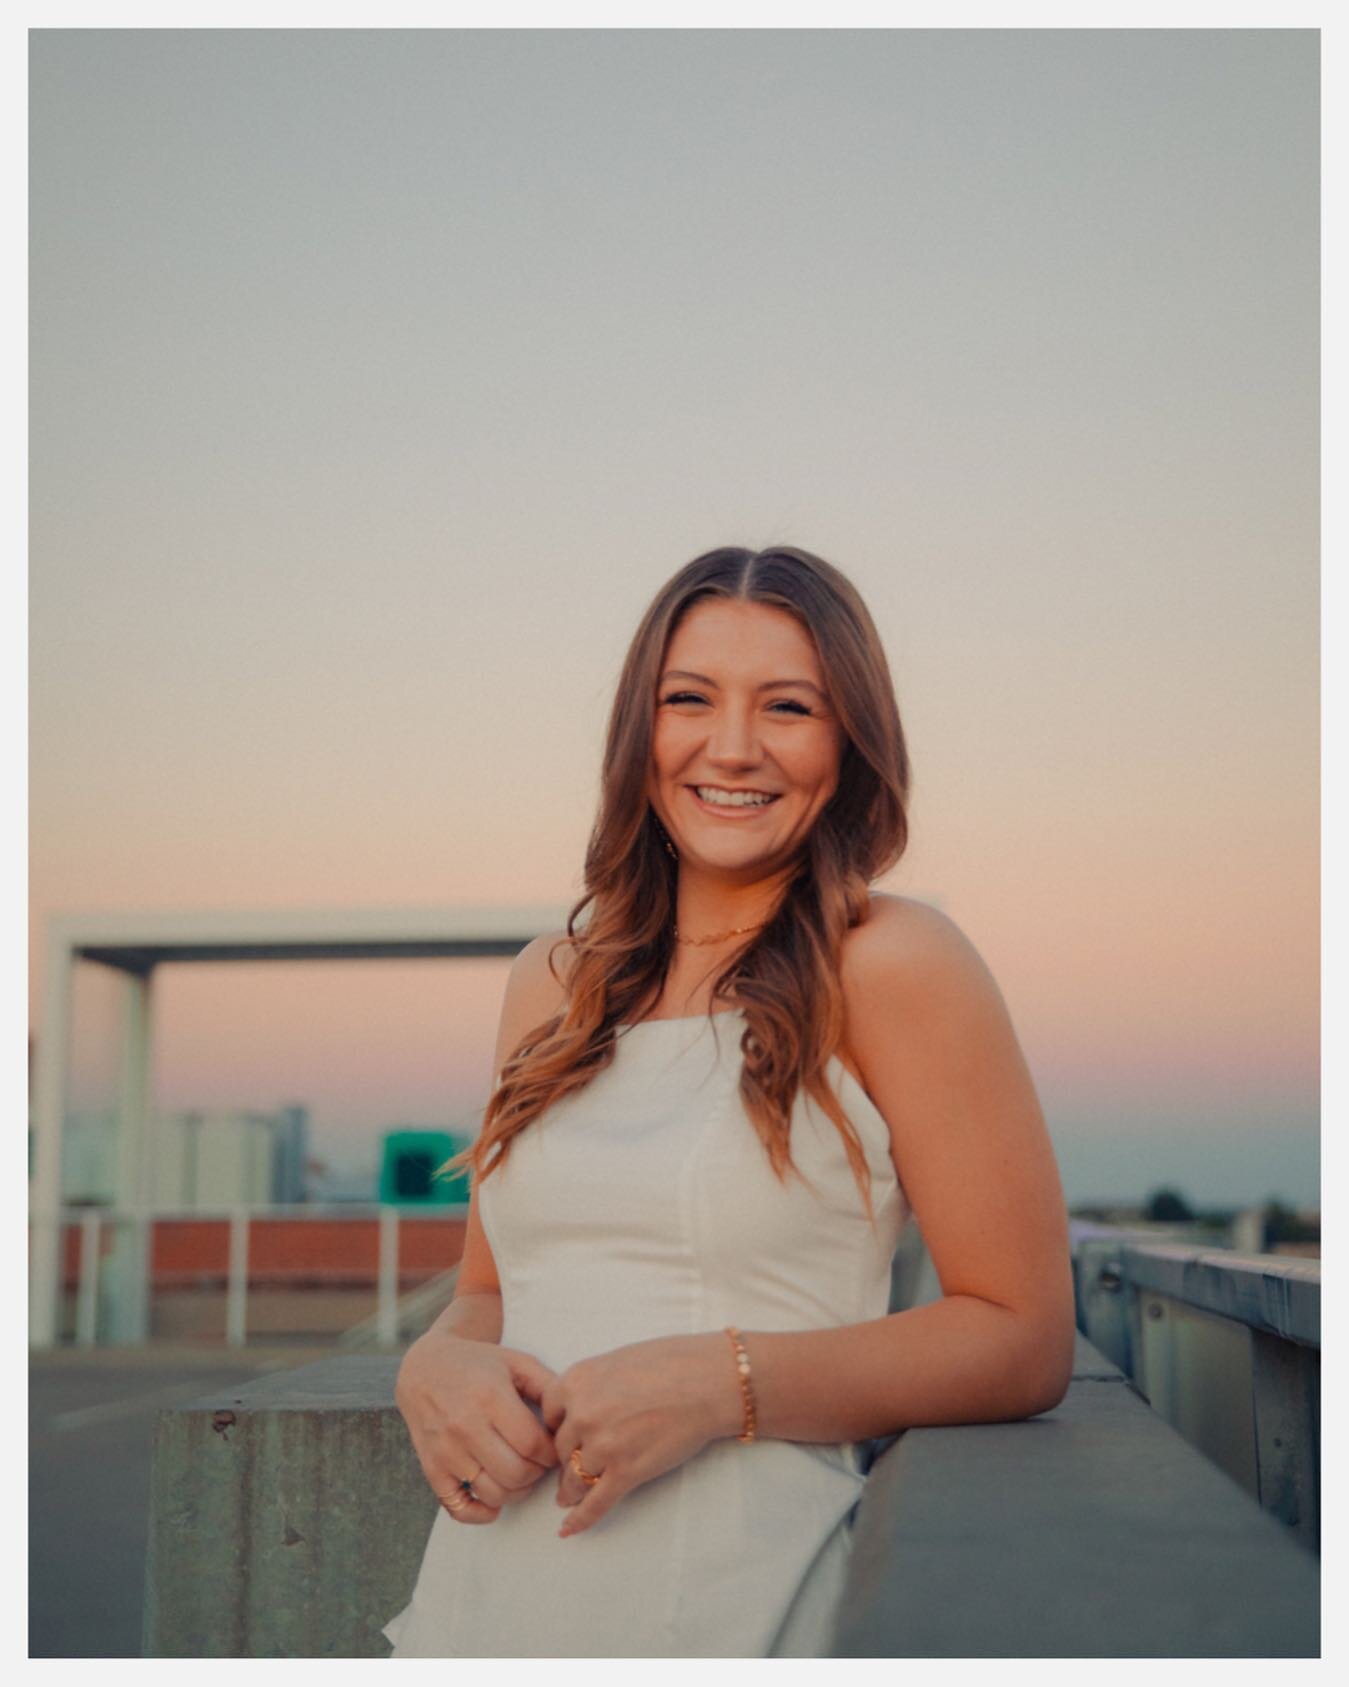 This was one of those senior sessions that got me right in the feels. Megan, I&rsquo;m so so proud of you and I&rsquo;m excited to edit everything from a beautiful night!